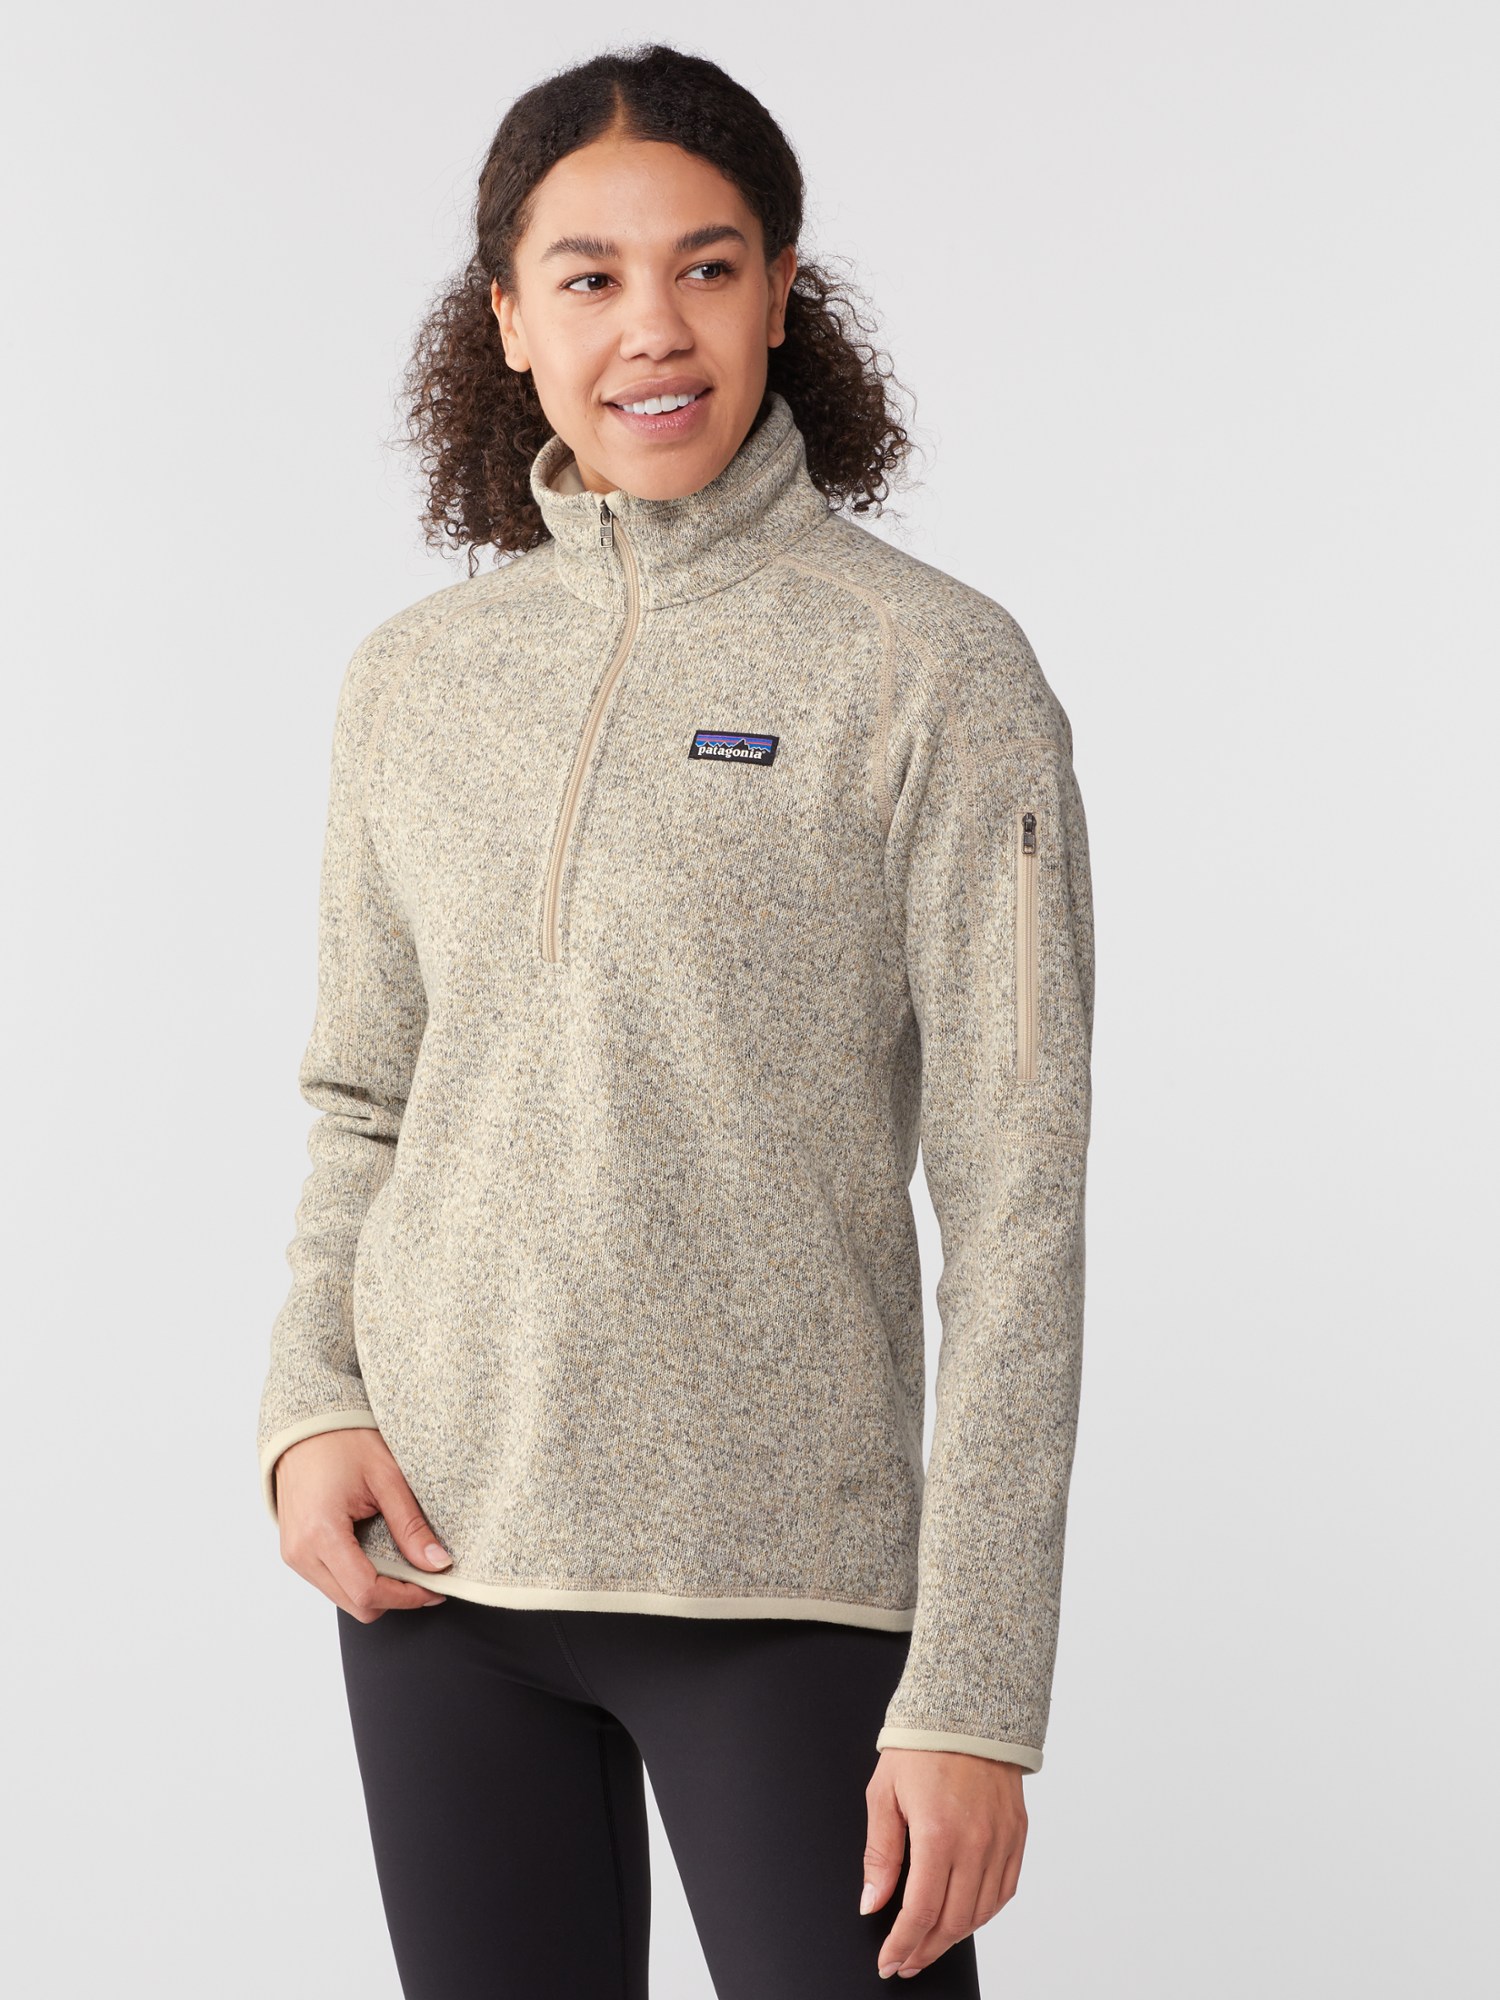 patagonia sweater fleece from the rei holiday warm up sale